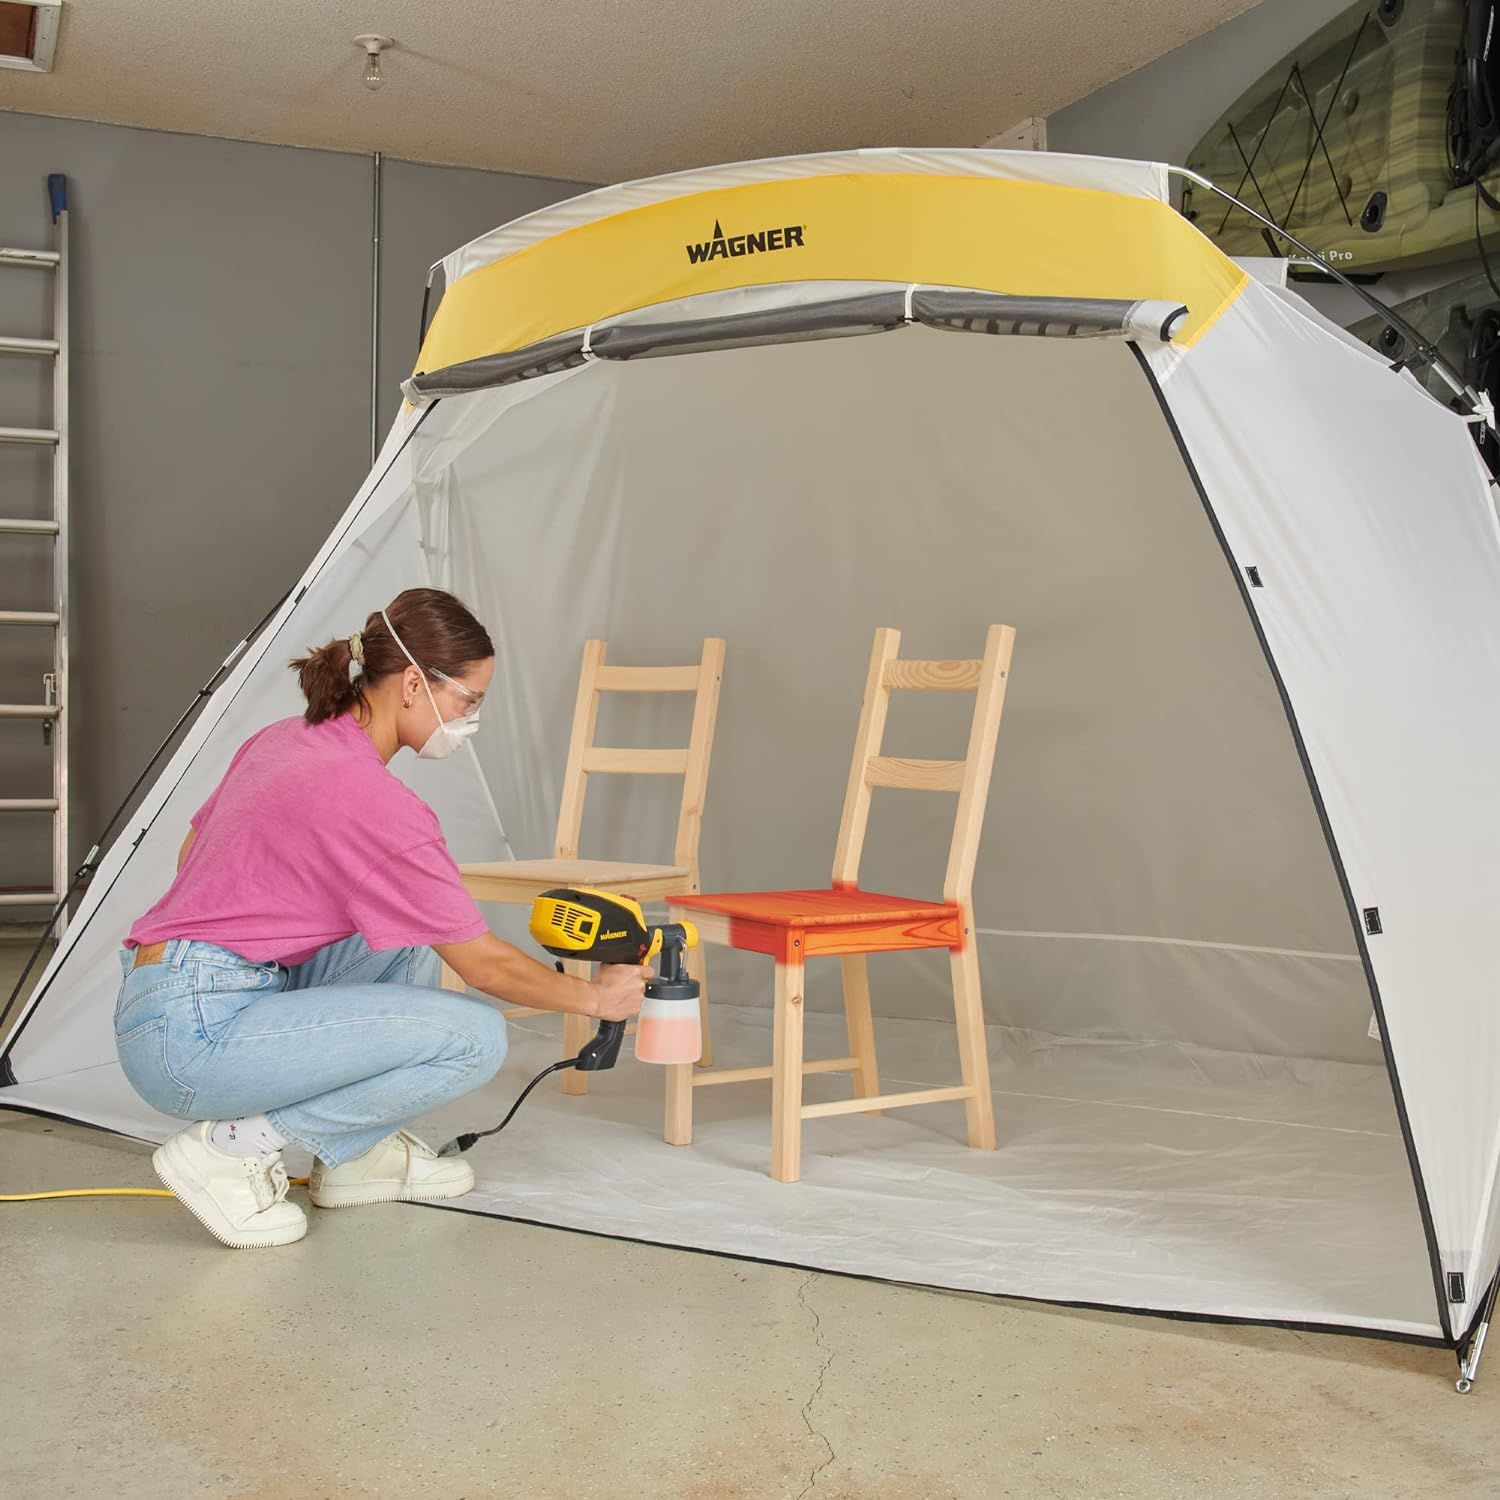 Wagner Spraytech C900038.M Large Spray Shelter with Built-In Floor &  Screen, Portable Paint Booth for DIY Spray Painting, Hobby Paint Booth Tool